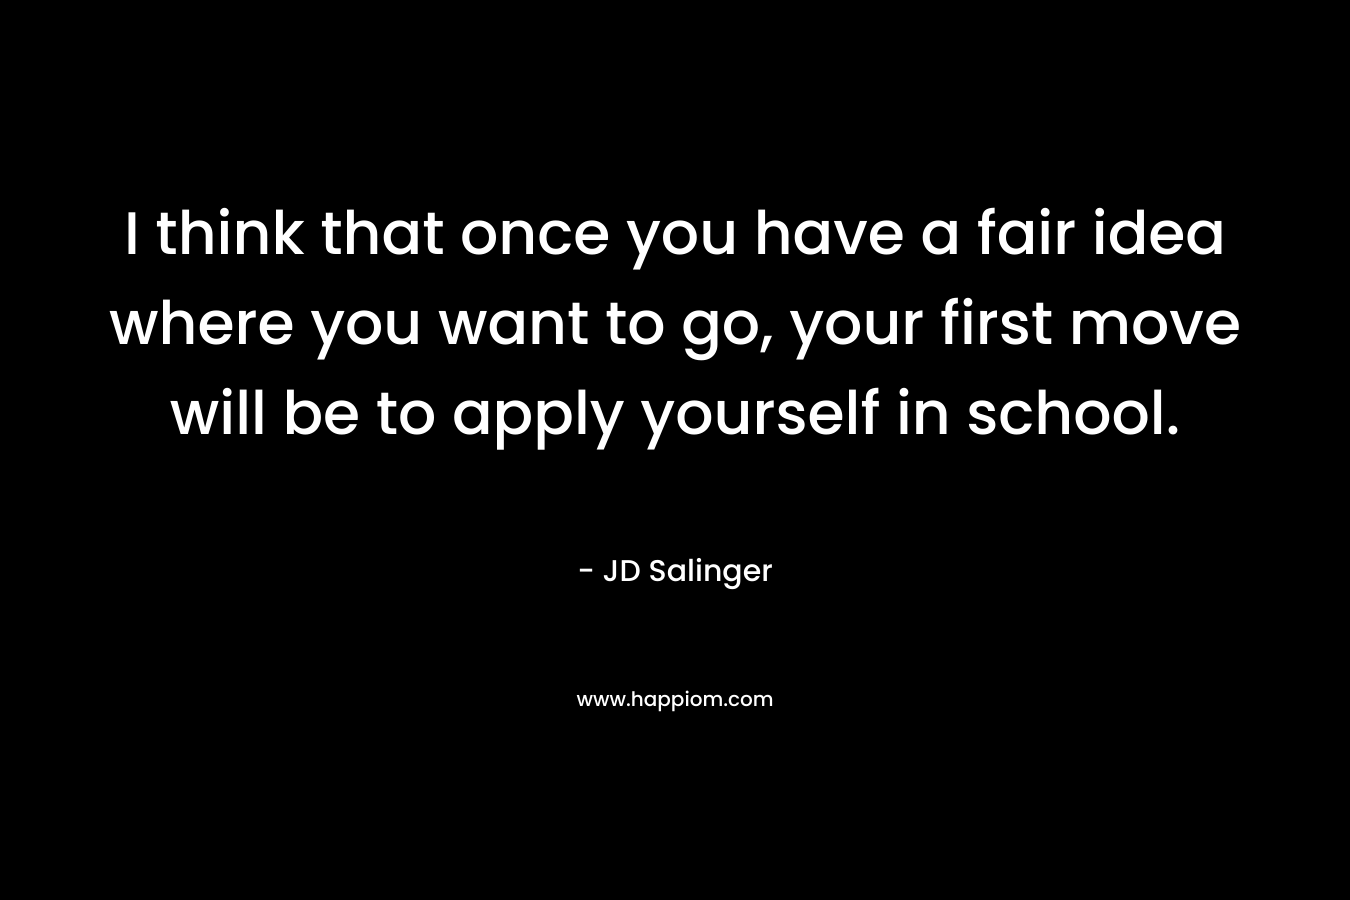 I think that once you have a fair idea where you want to go, your first move will be to apply yourself in school. – JD Salinger